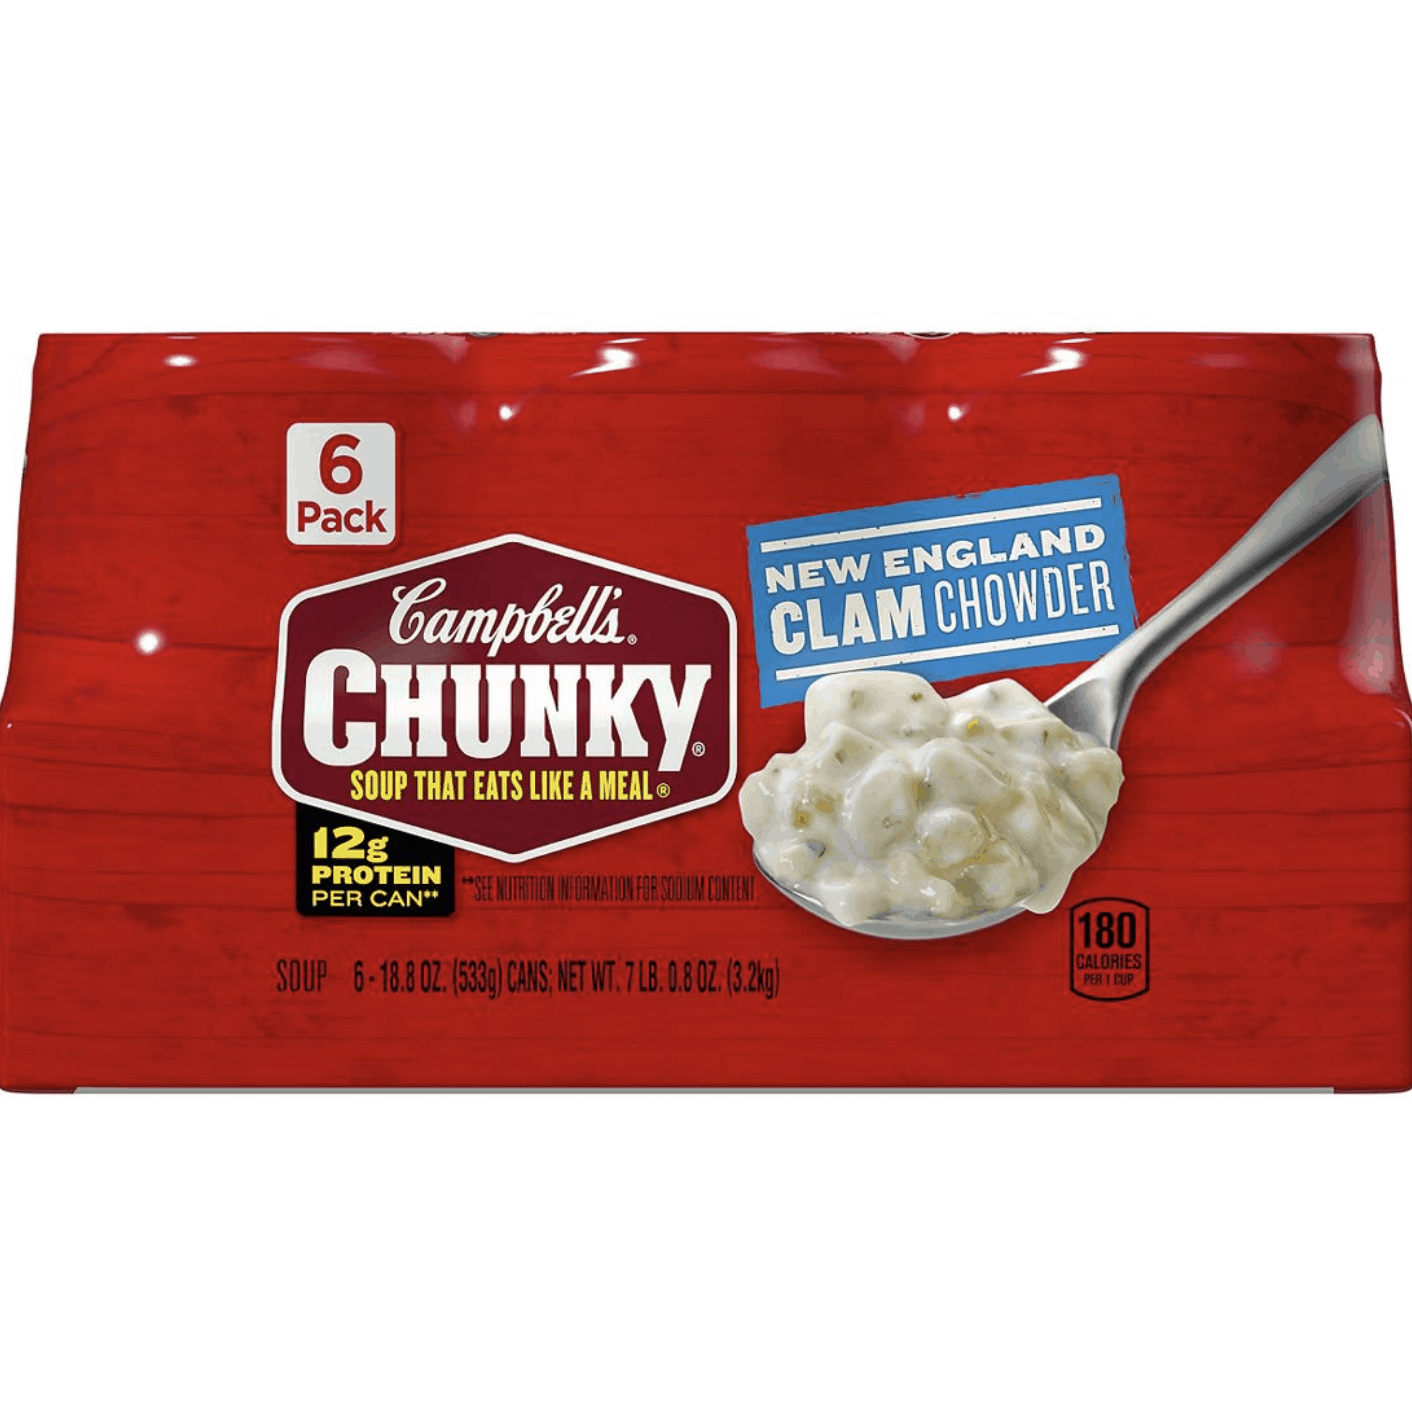 Campbell's Chunky New England Clam Chowder, 6 pk.